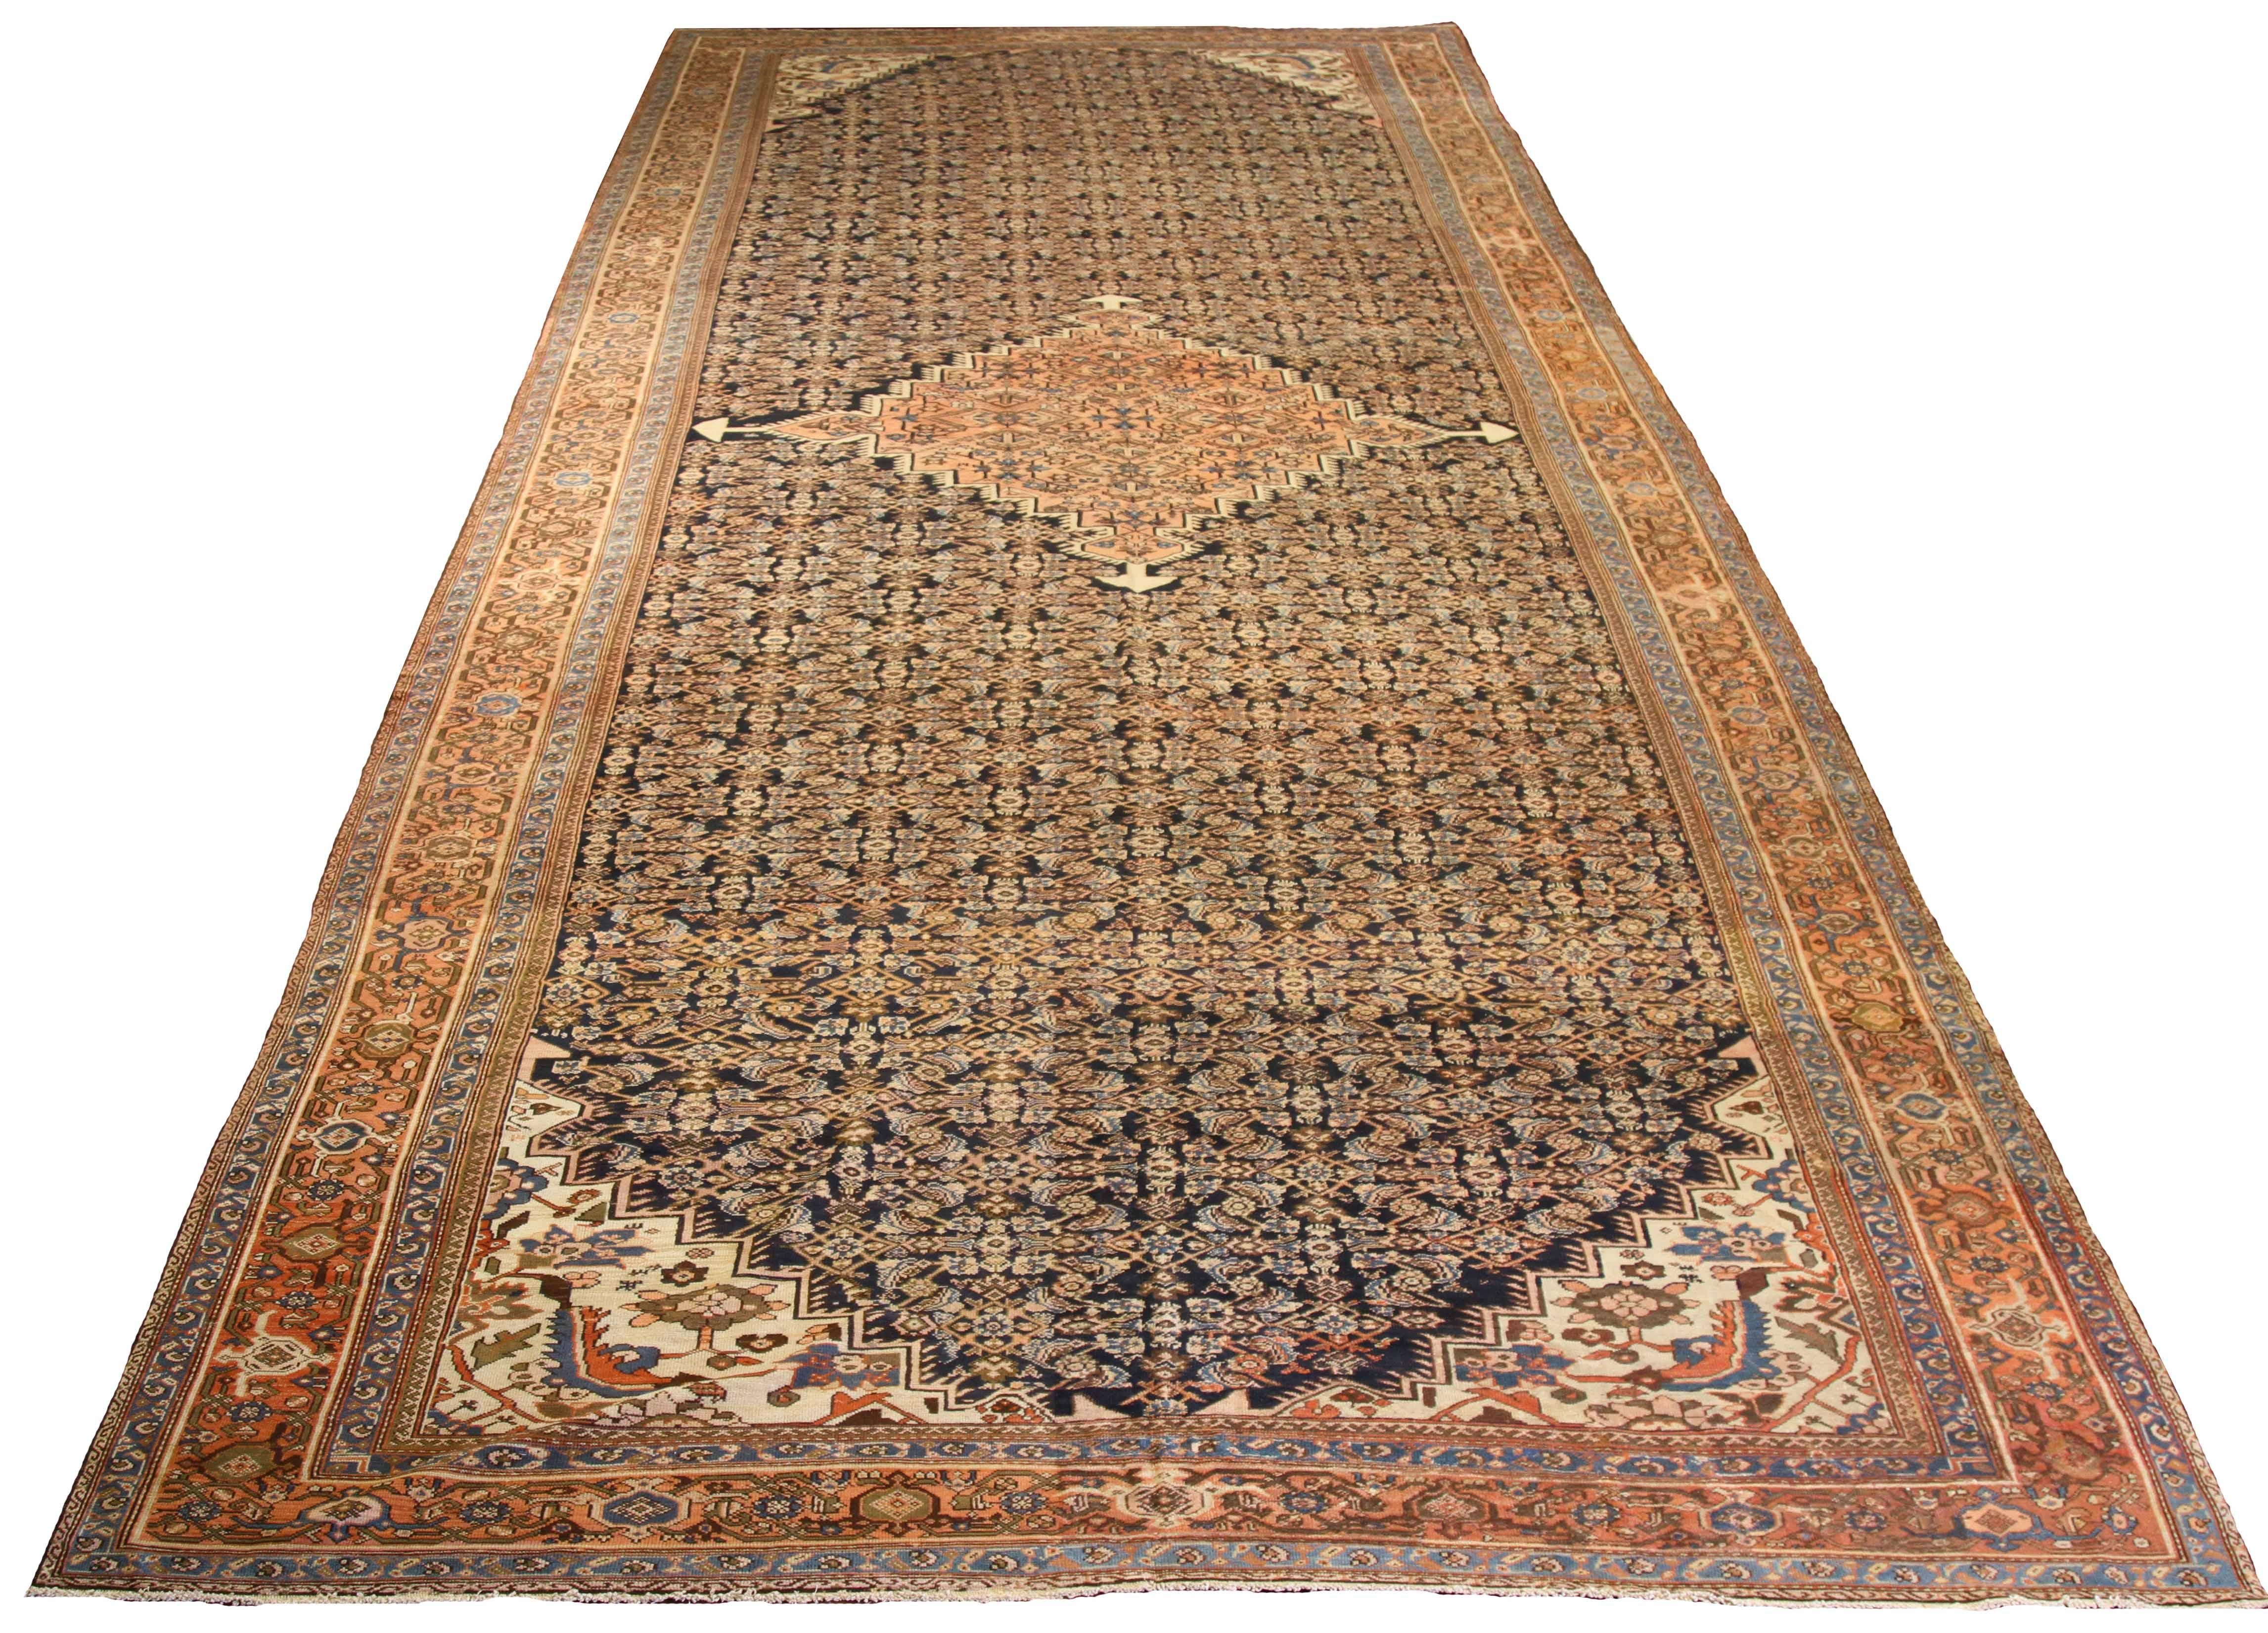 Antique Persian area rug handwoven from the finest sheep’s wool. It’s colored with all-natural vegetable dyes that are safe for humans and pets. It’s a traditional Sultanabad design handwoven by expert artisans. It’s a lovely area rug that can be